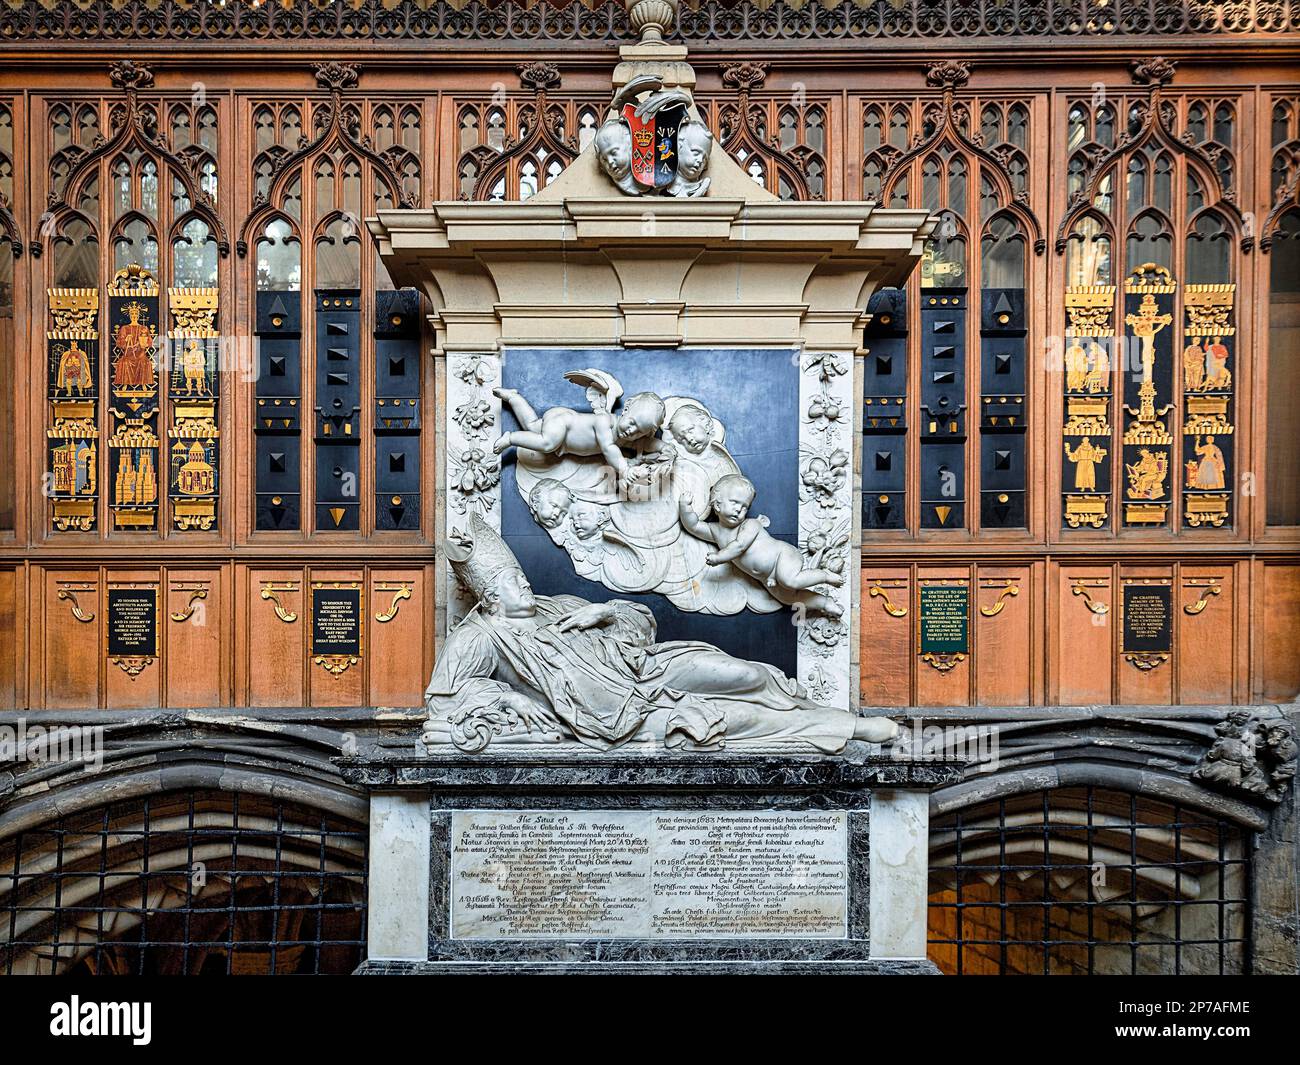 Memorial Stone with Sculpture and Inscription, York Minster, Cathedral, York, England, Regno Unito Foto Stock